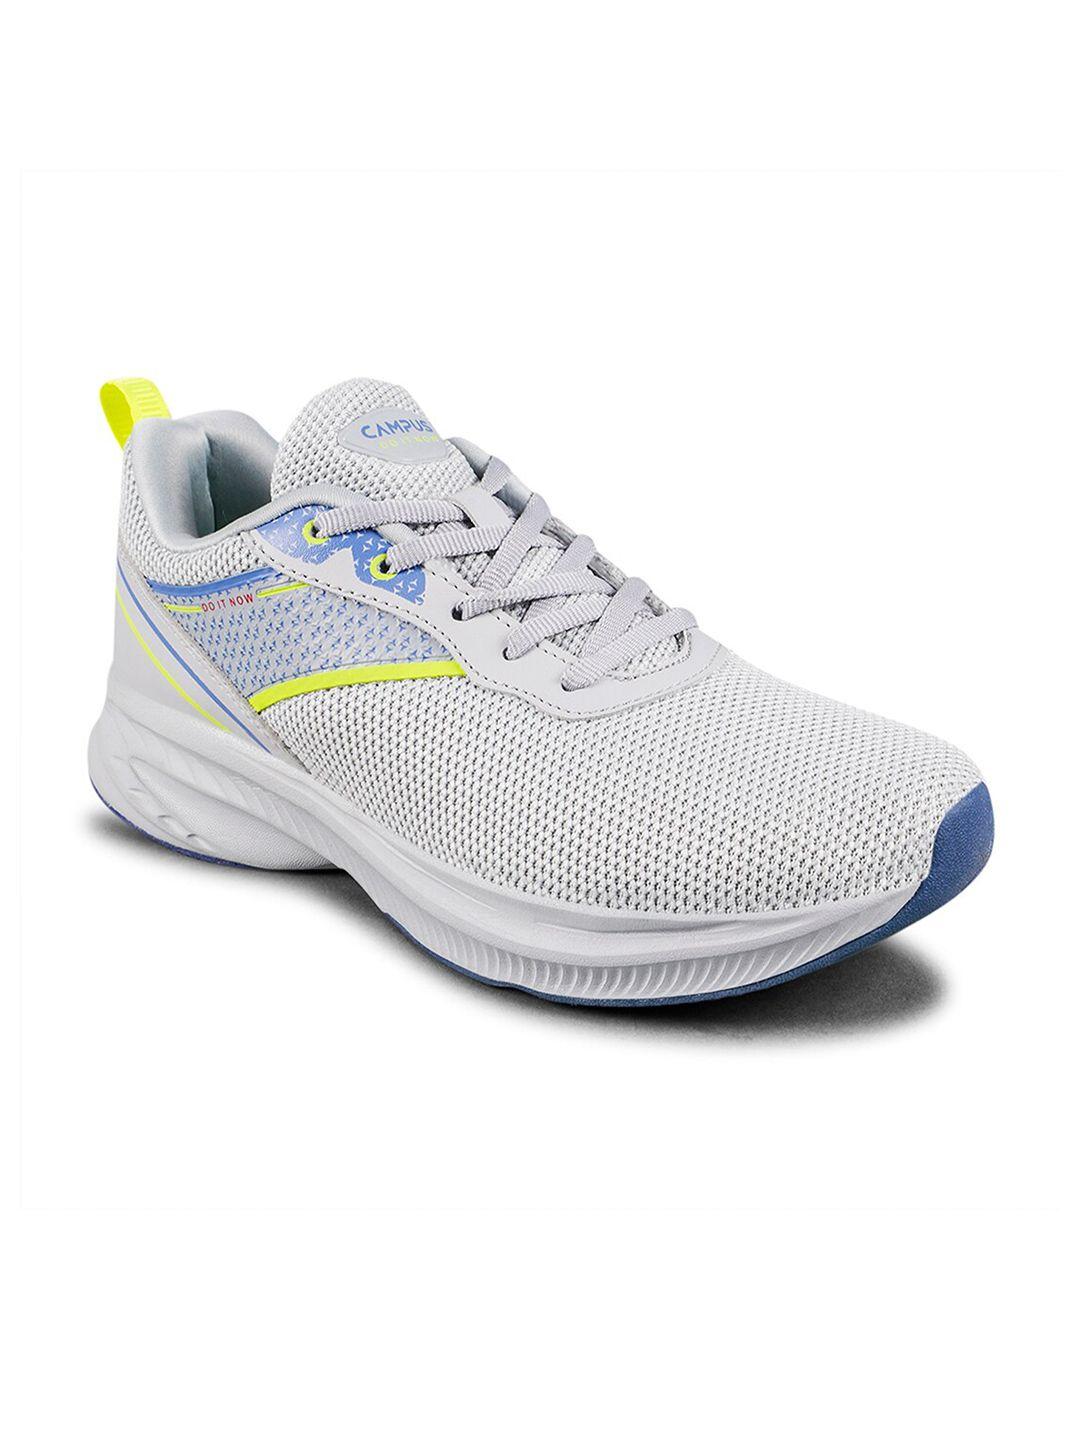 campus men cottage breathable mesh non-marking running shoes